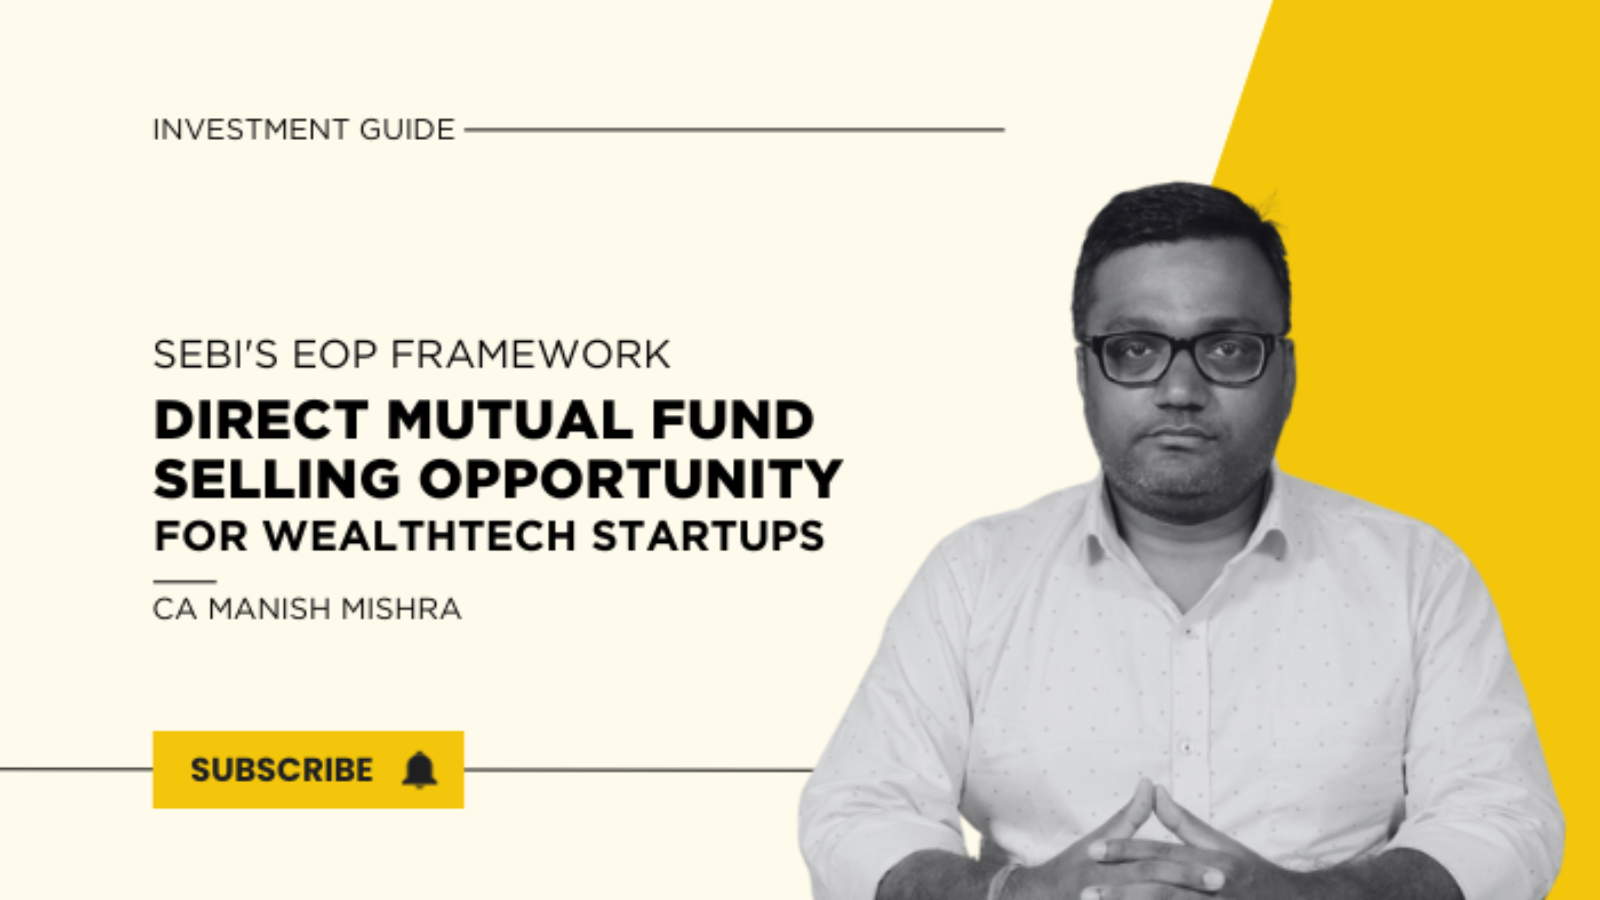 CA Manish Mishra discussing SEBI’s EOP Framework : Direct Mutual Fund Selling Opportunity for WealthTech Startups